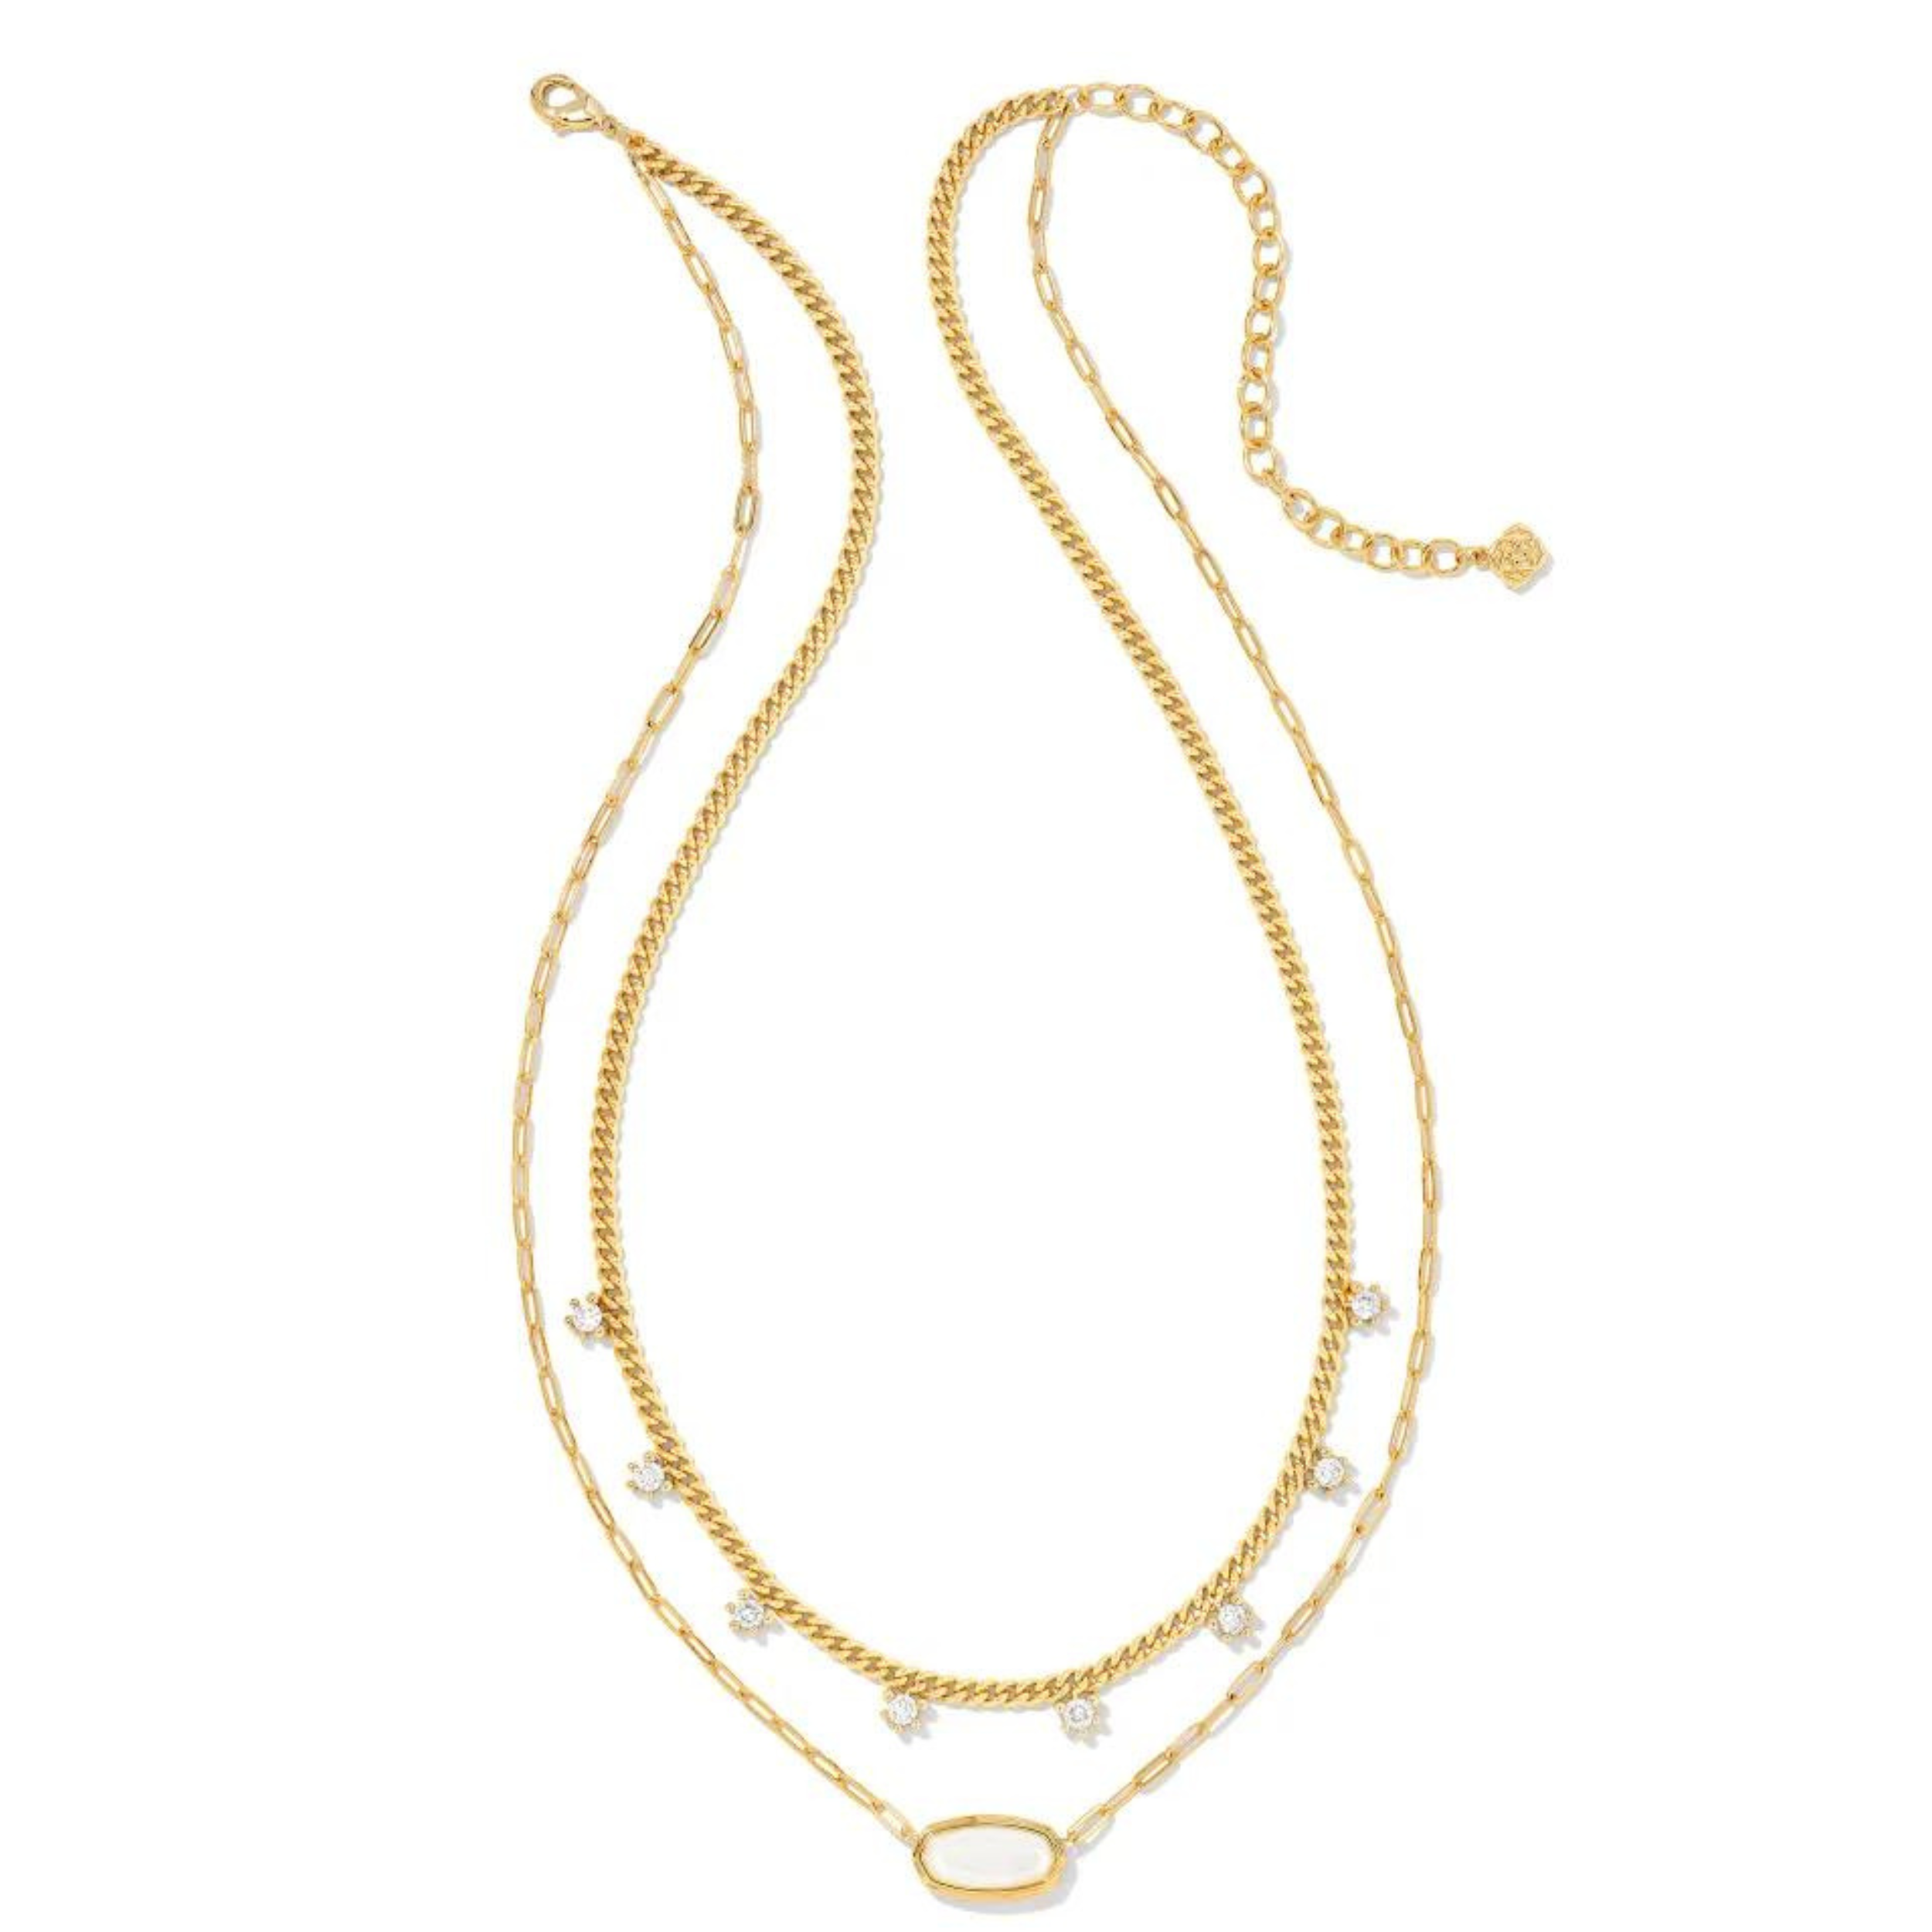 Kendra Scott | Framed Elisa Gold Multi Strand Necklace in Iridescent Opalite Illusion - Giddy Up Glamour Boutique